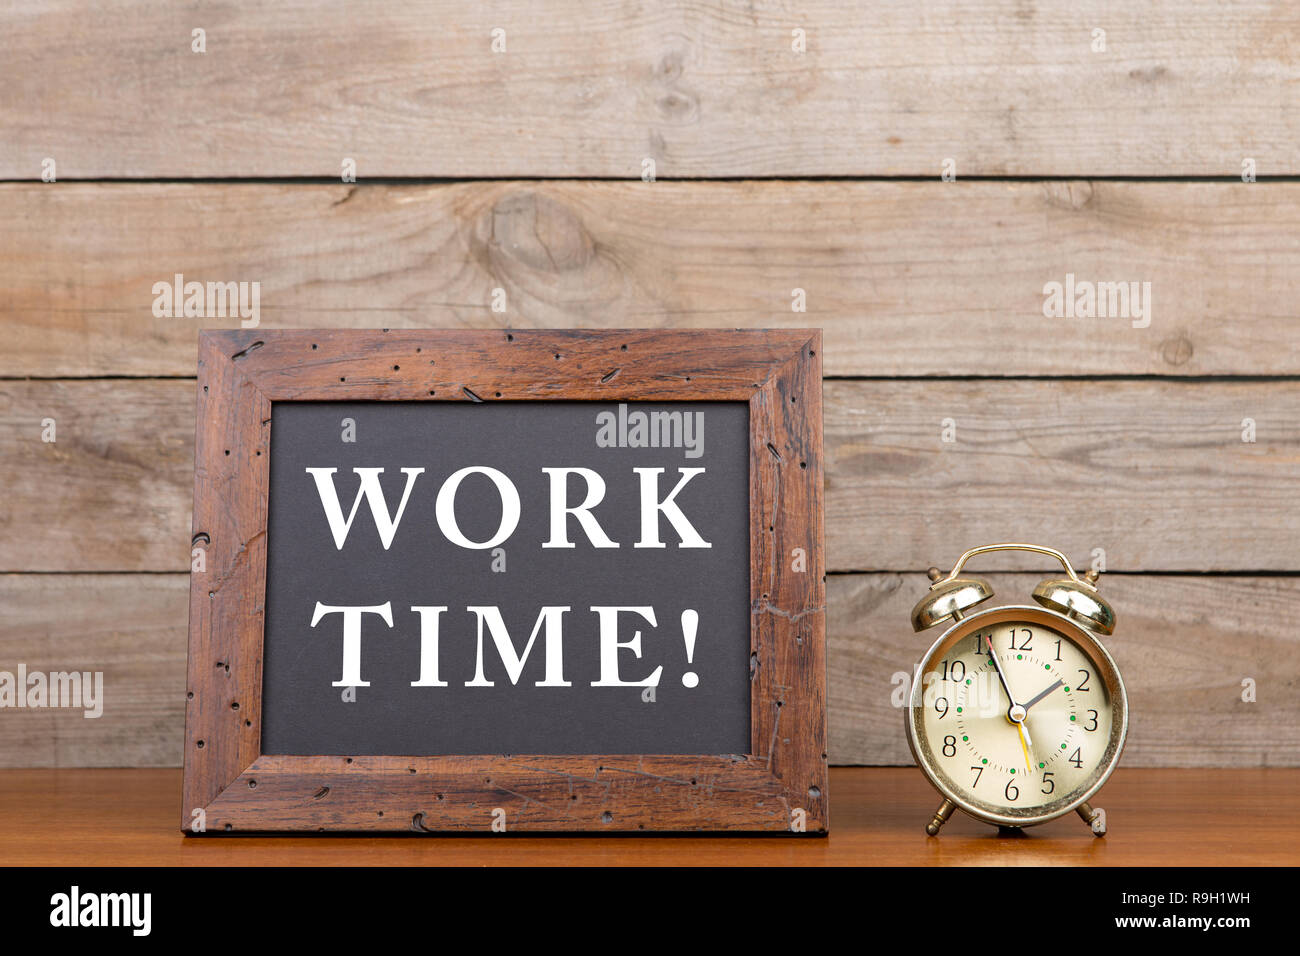 Alarm clock and blackboard with text 'Work time' on brown wooden background Stock Photo